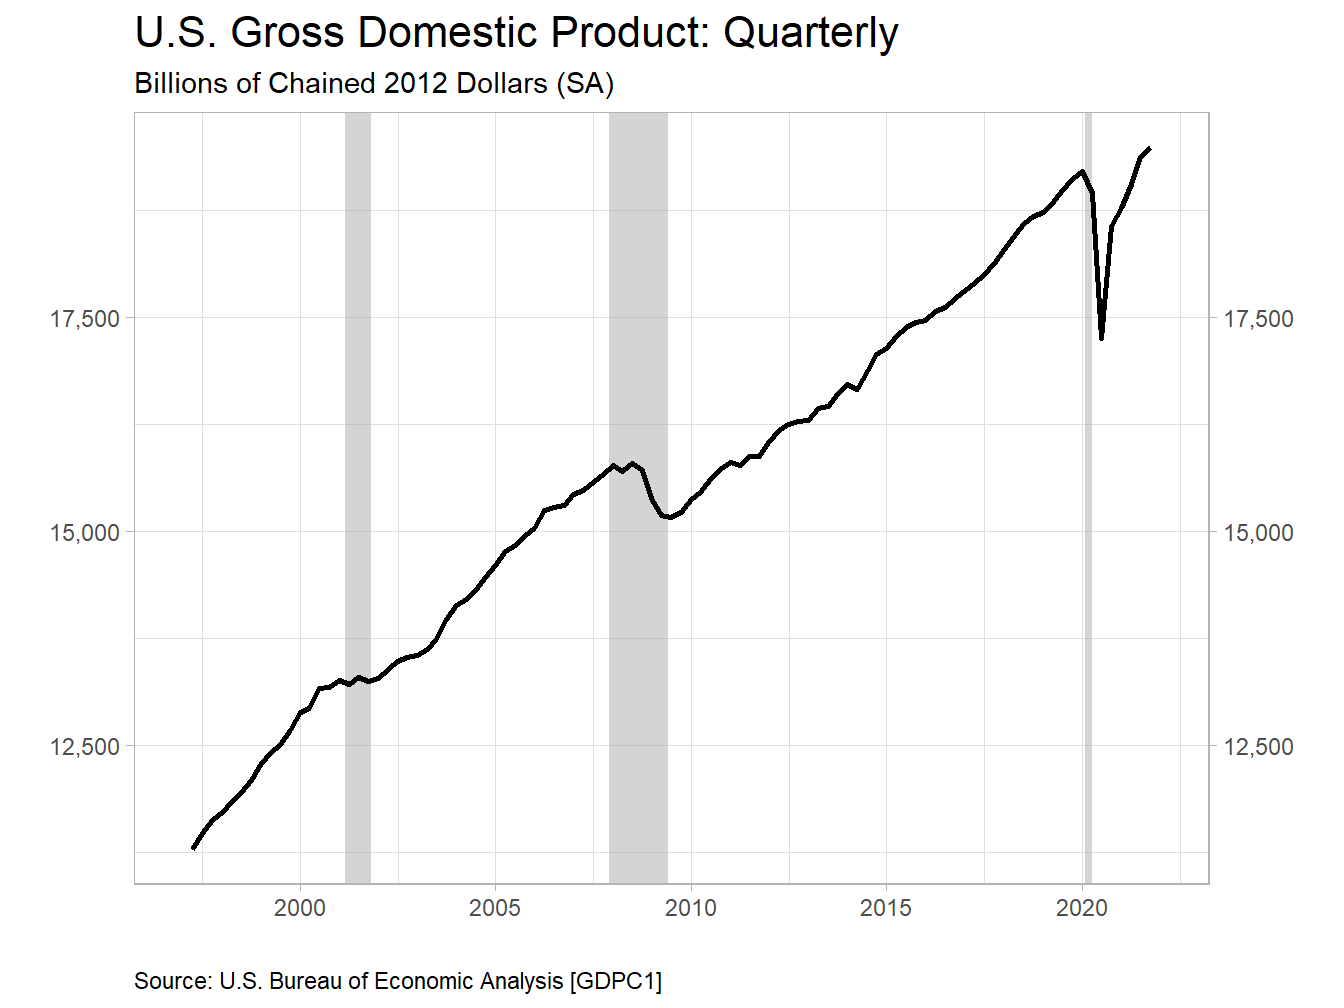 Real Output Exhibits Both Growth and Cycles